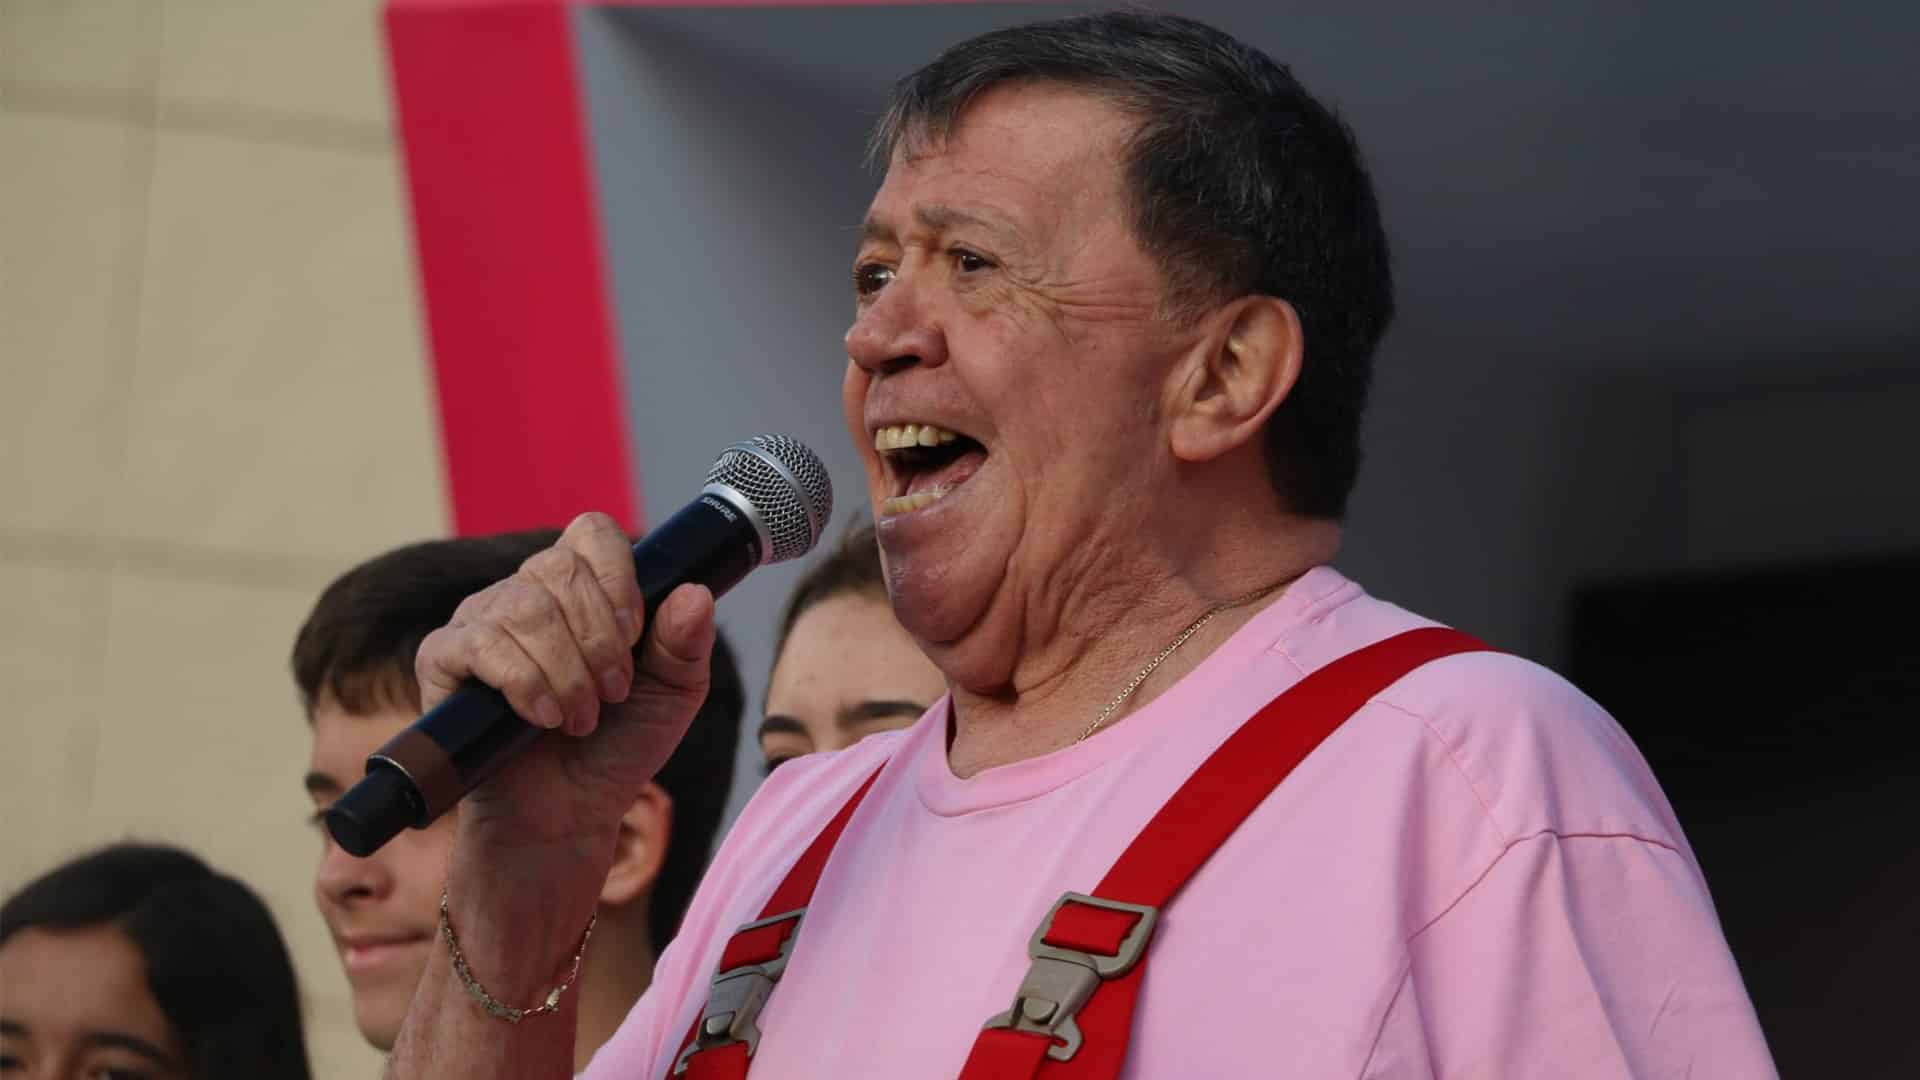 Chabelo herencia